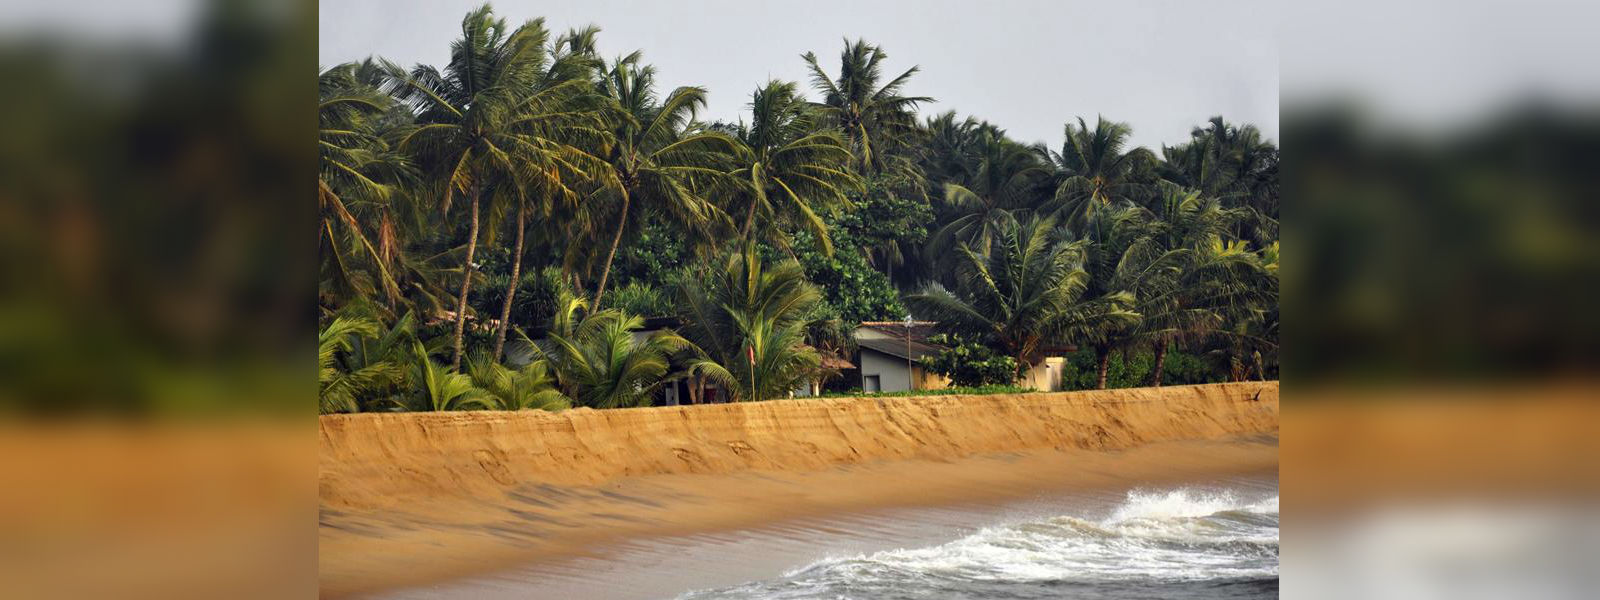 Rs 890mn allocated to pump sand into Calido beach